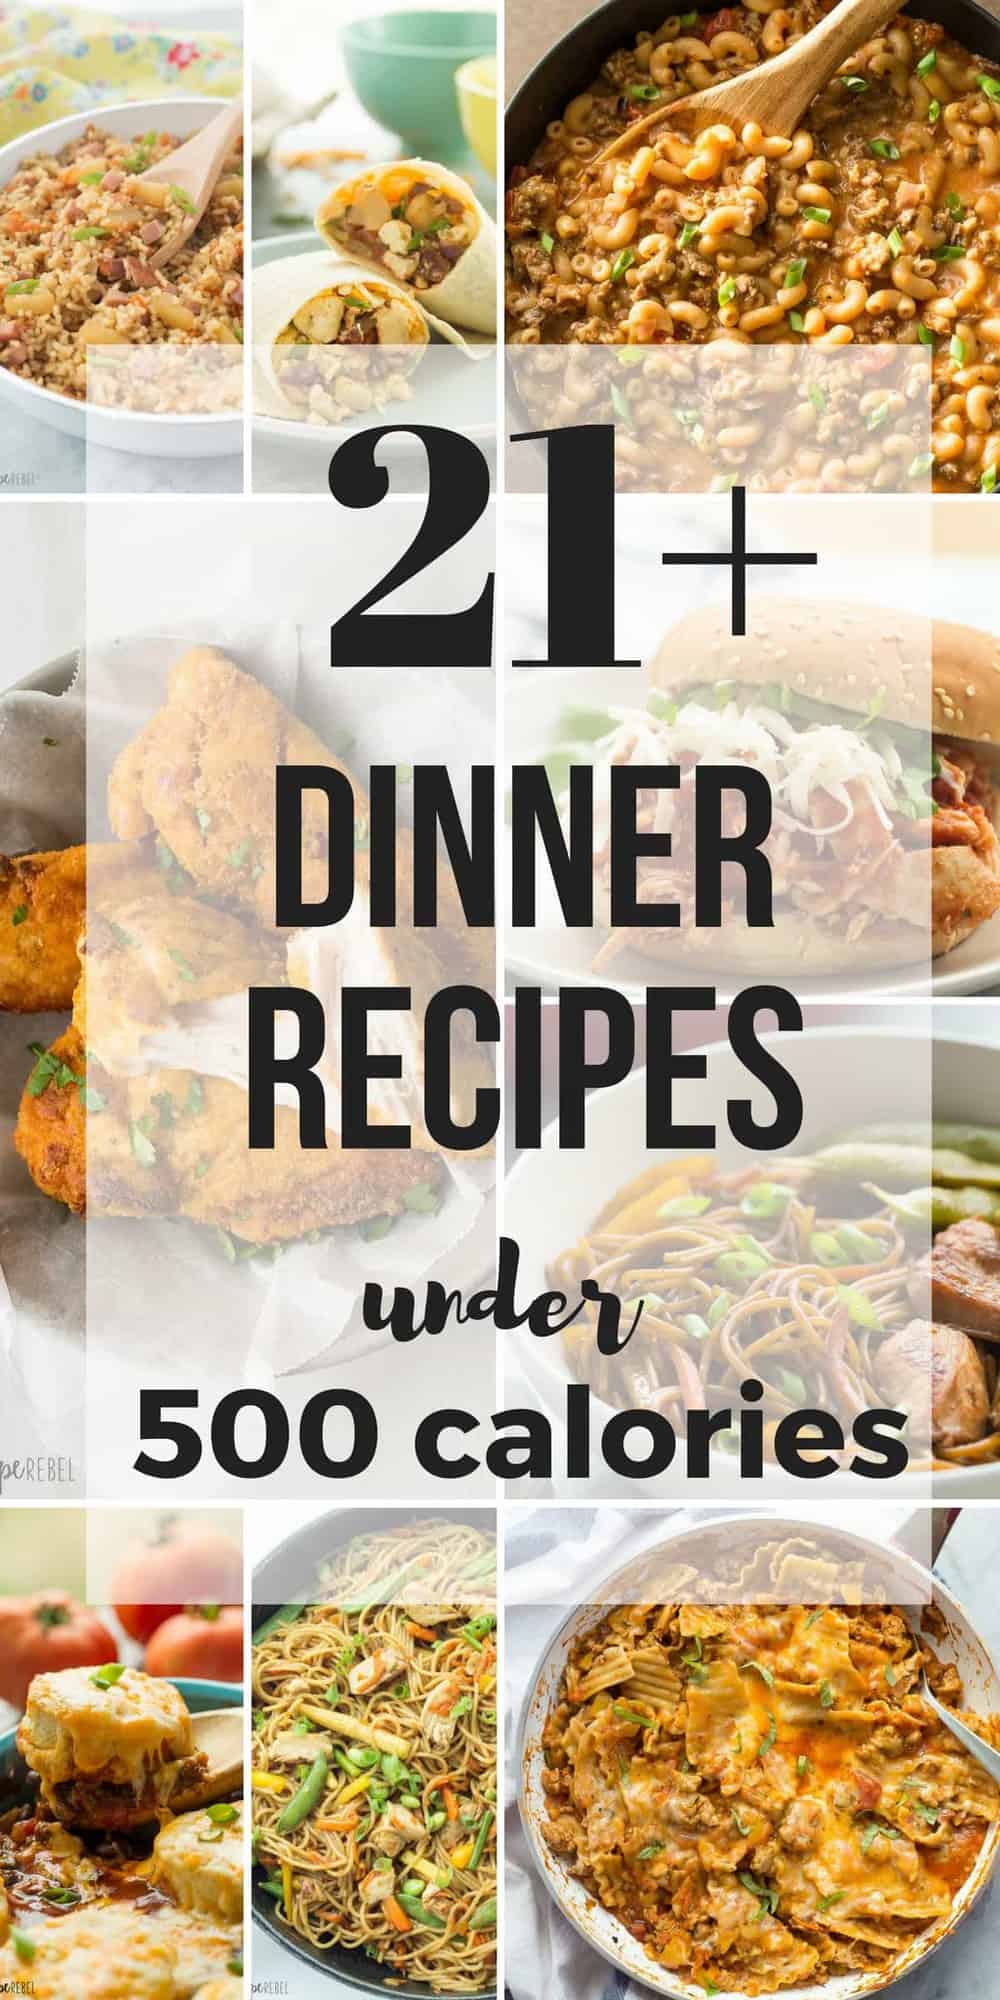 collage of dinner recipes under 500 calories with multiple images and text